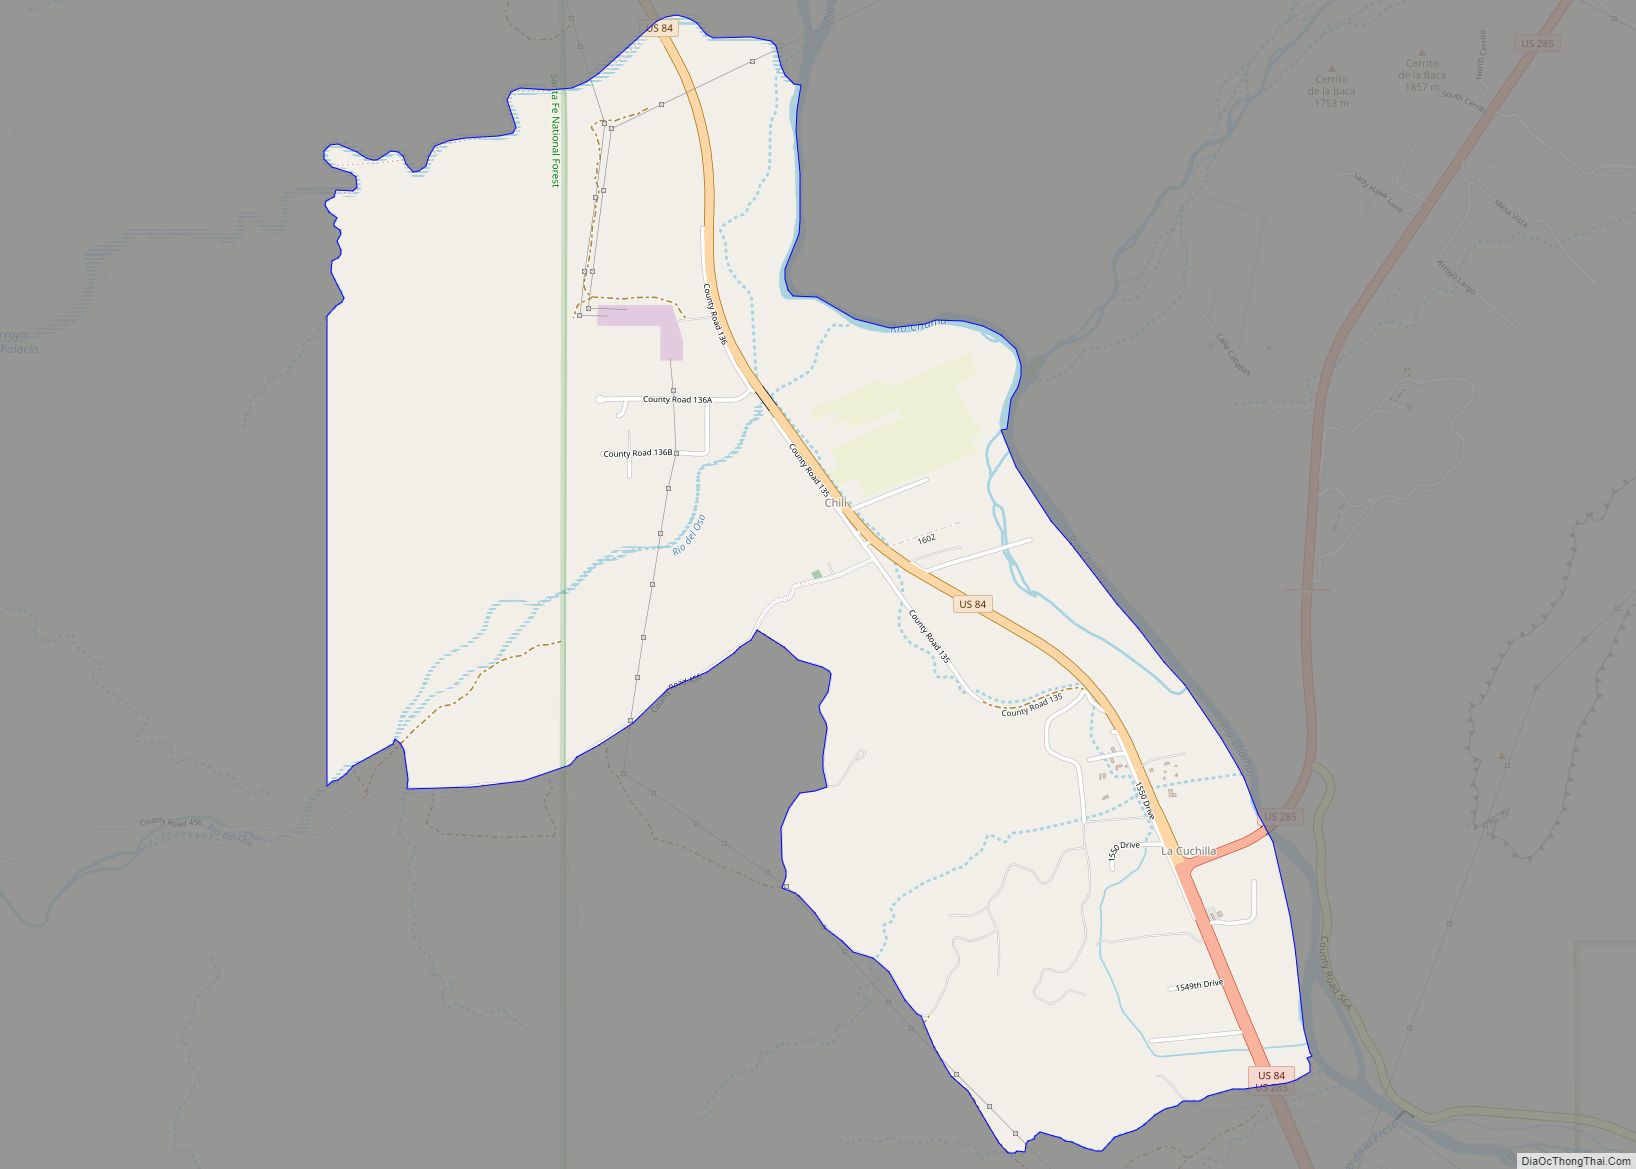 Map of Chili CDP